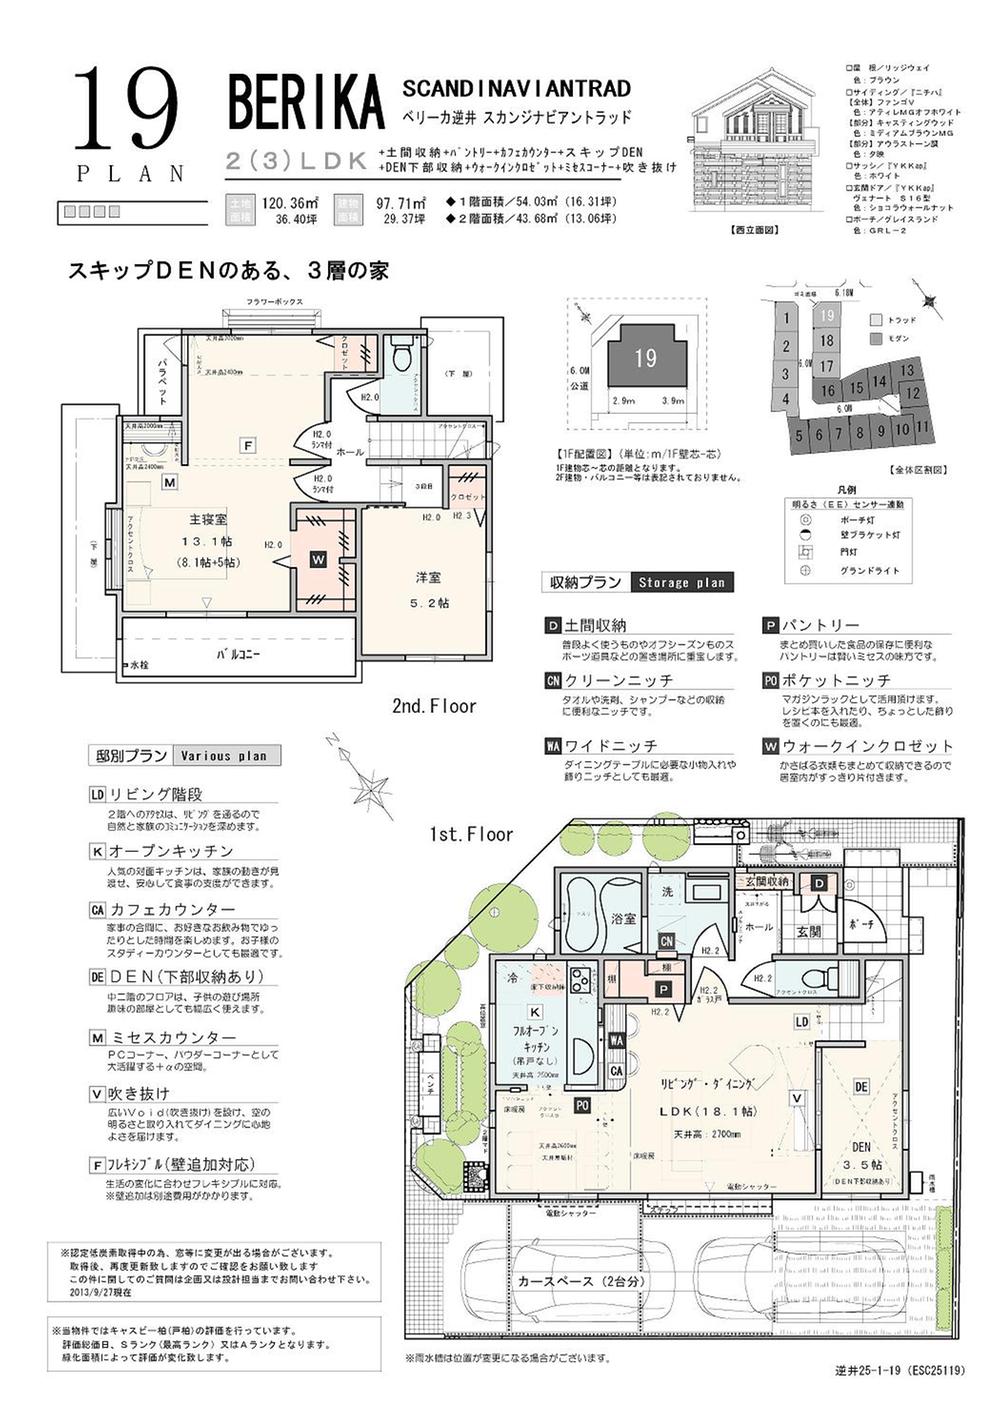 Floor plan. To Sakasai the rich green spreads, Incorporating the goodness of the Nordic lifestyle "Berika Sakasai" streets of all 19 House is the birth.